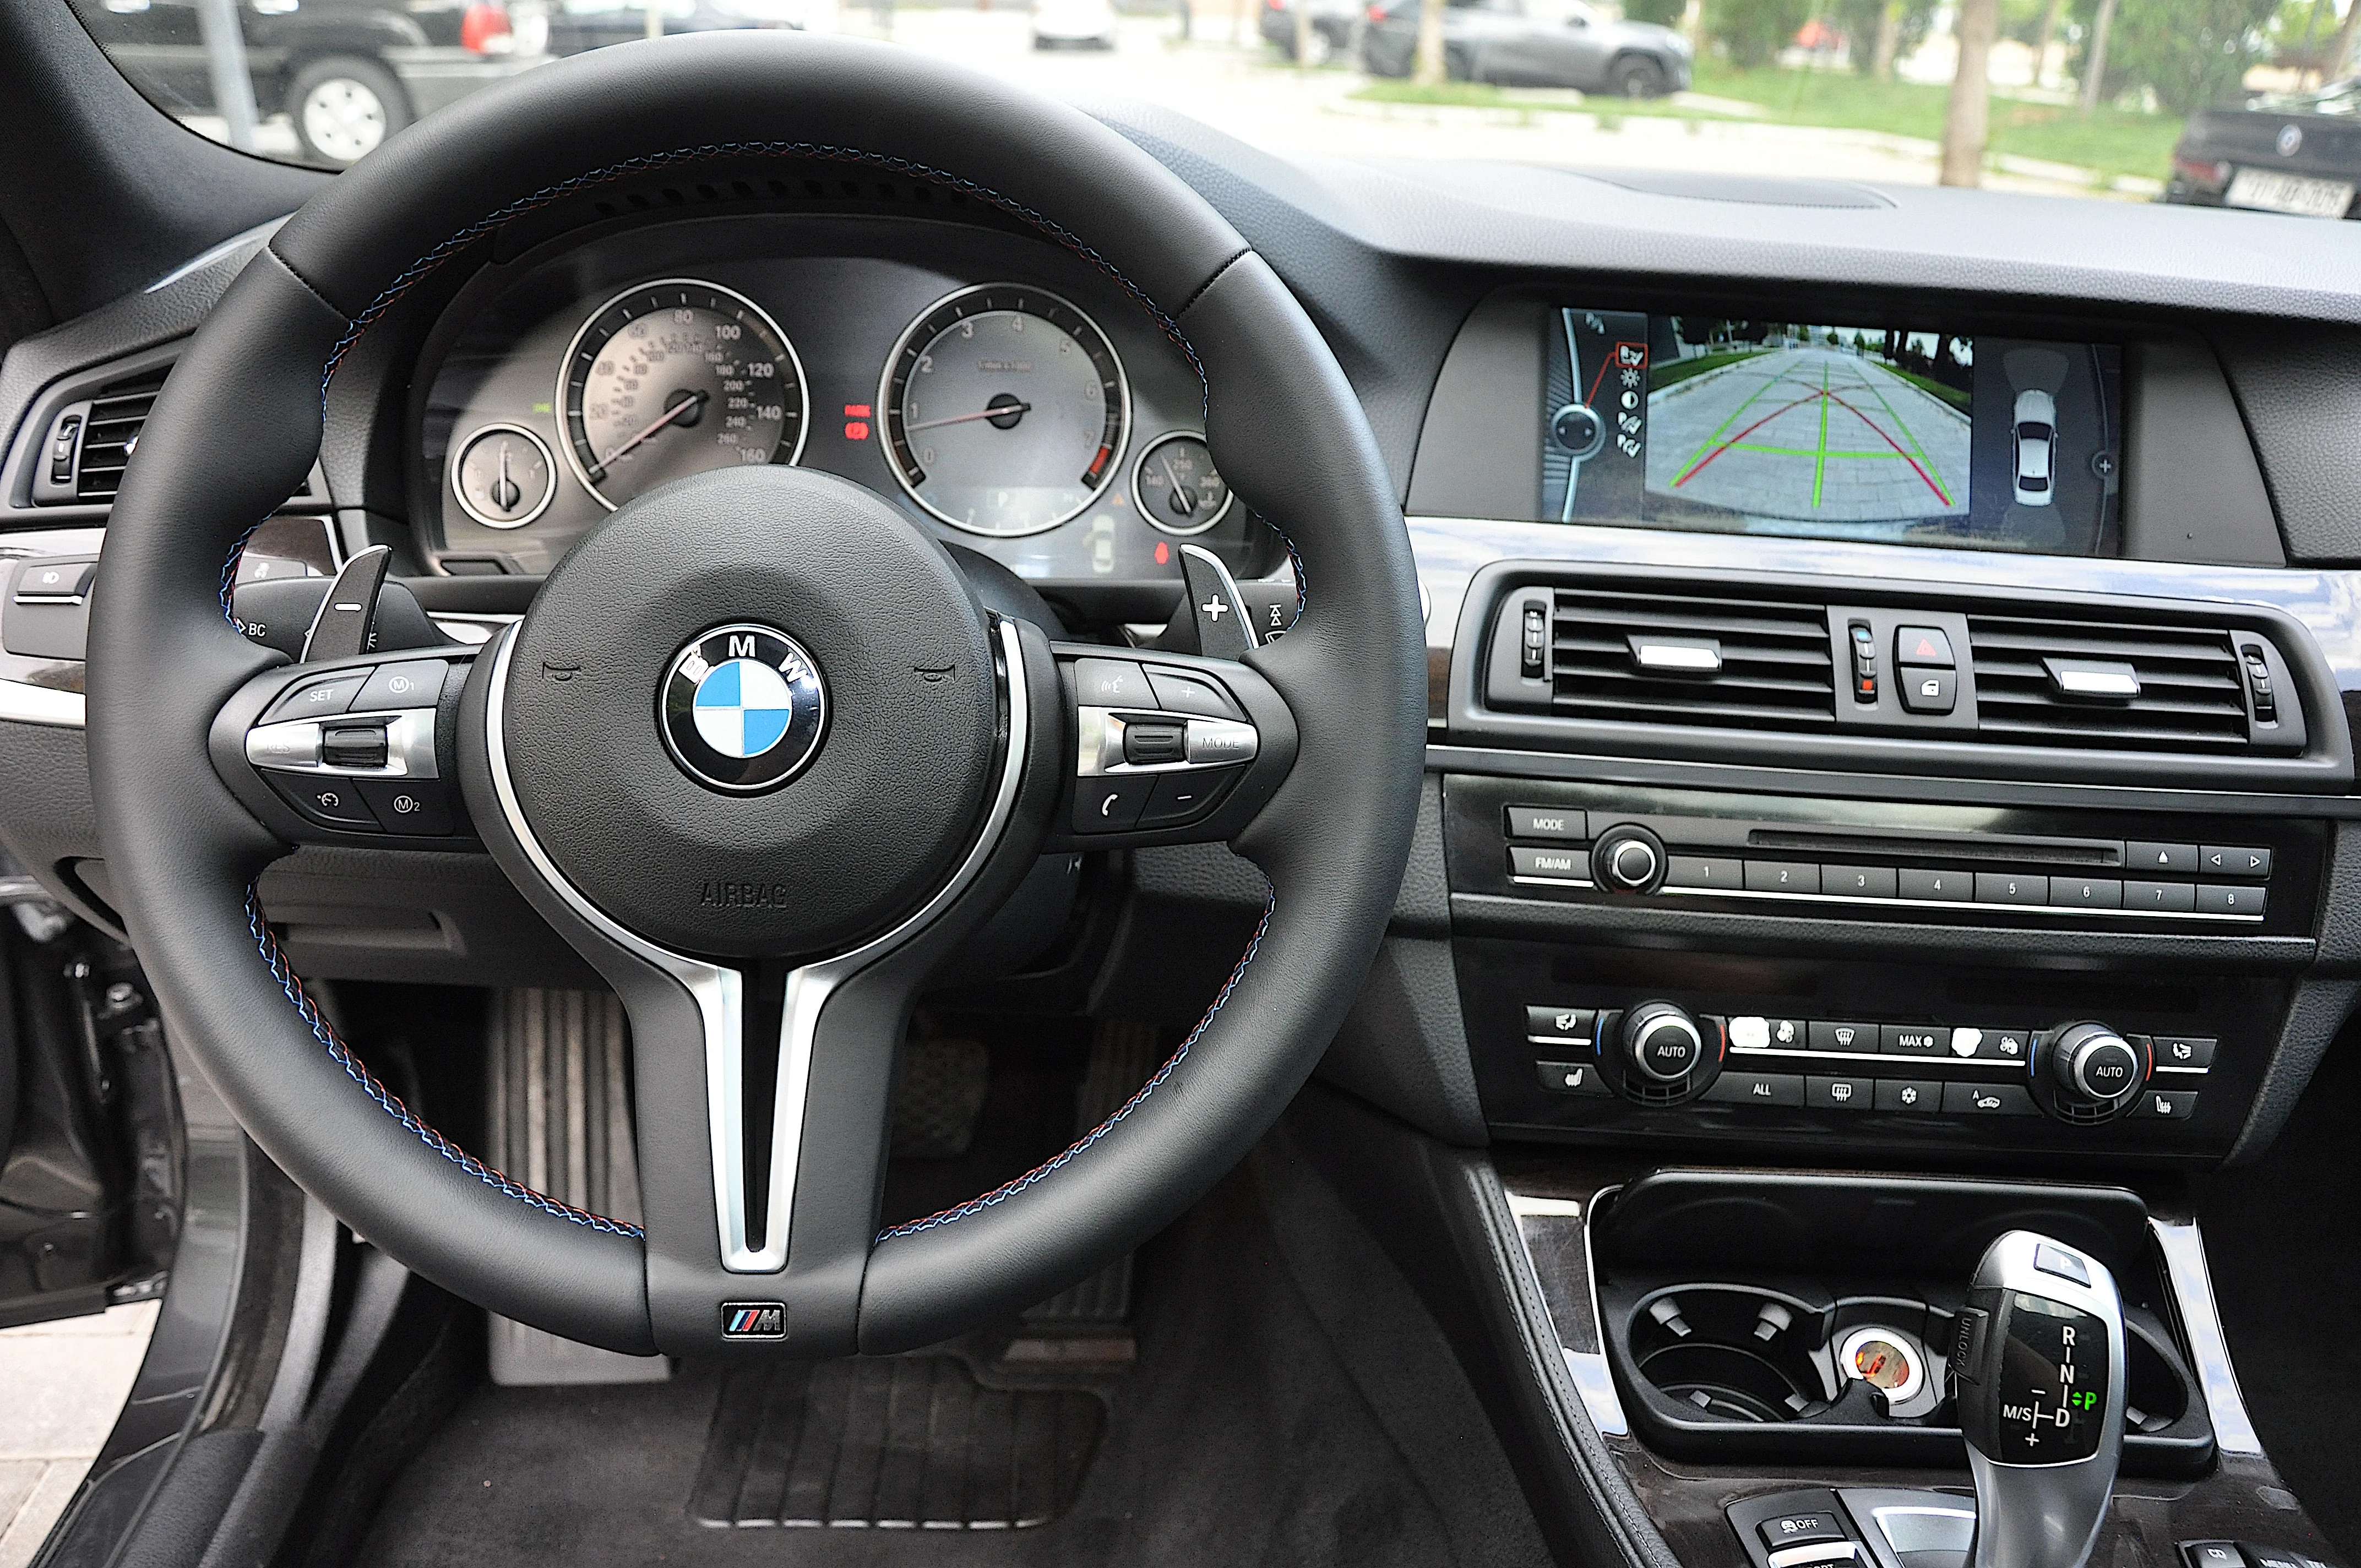 A BMW Leather Steering Wheel showcasing its luxurious design and comfort.